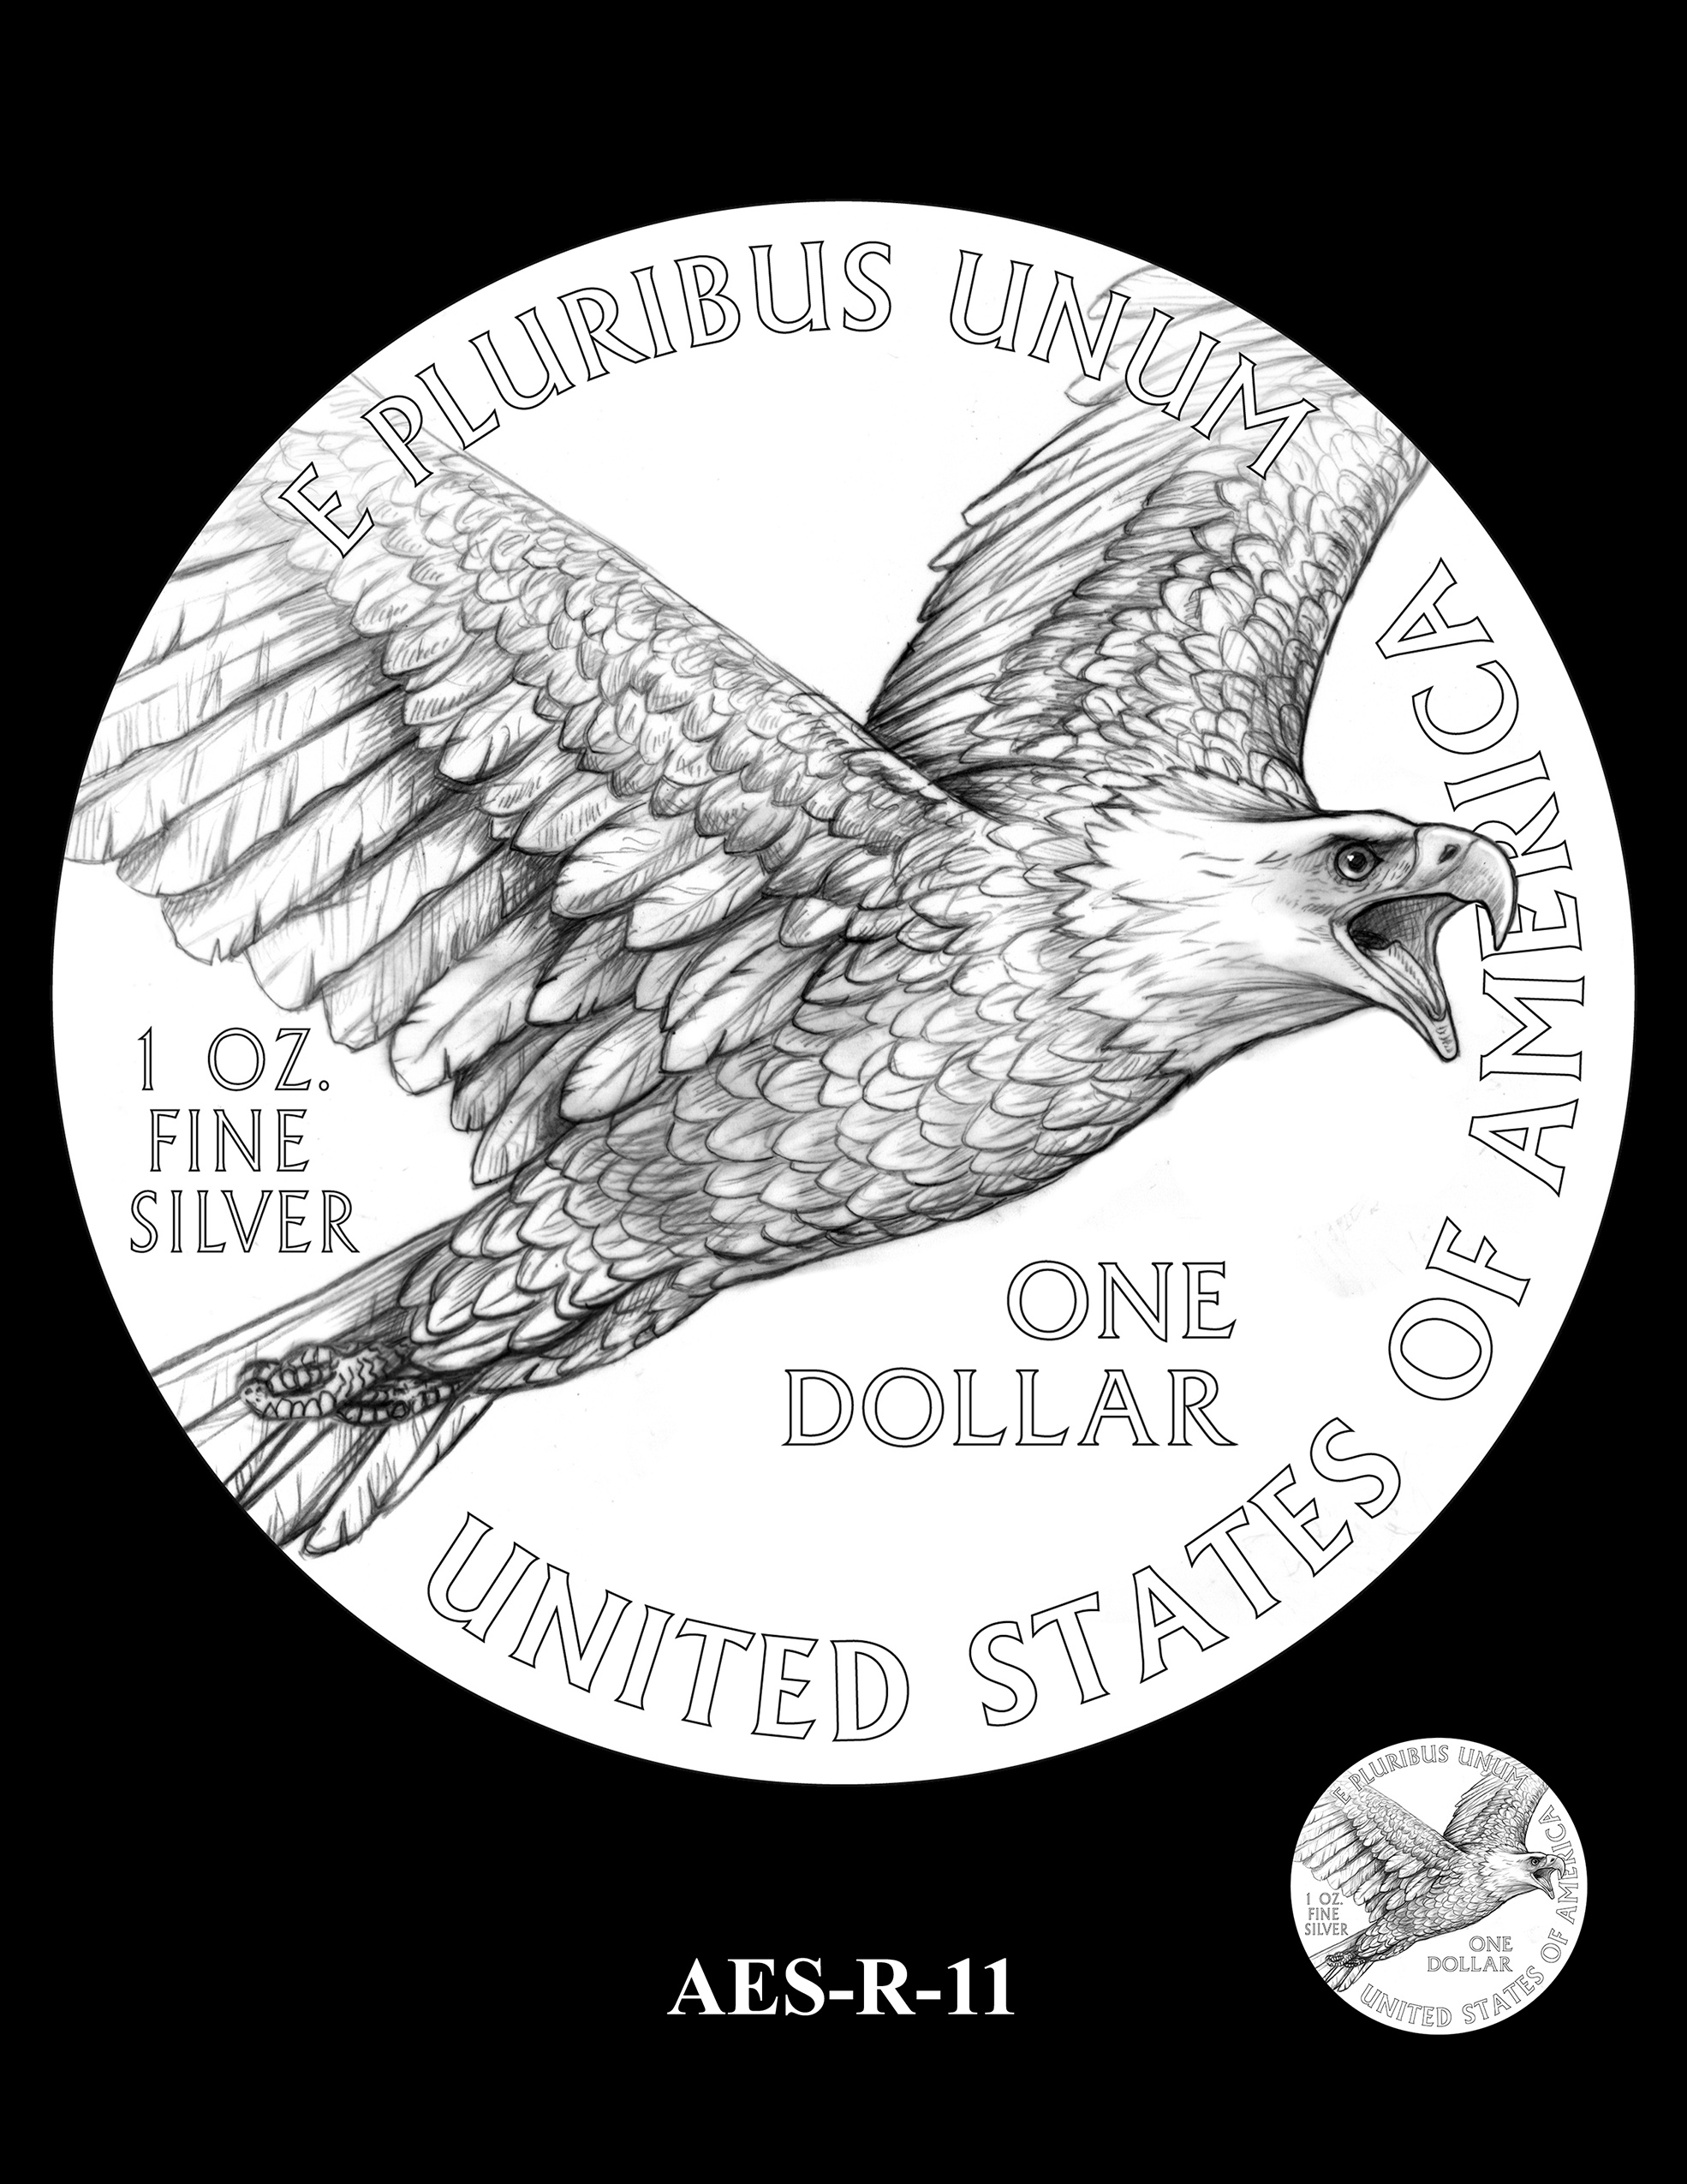 AES-R-11 -- American Eagle Proof and Bullion Silver Coin - Reverse